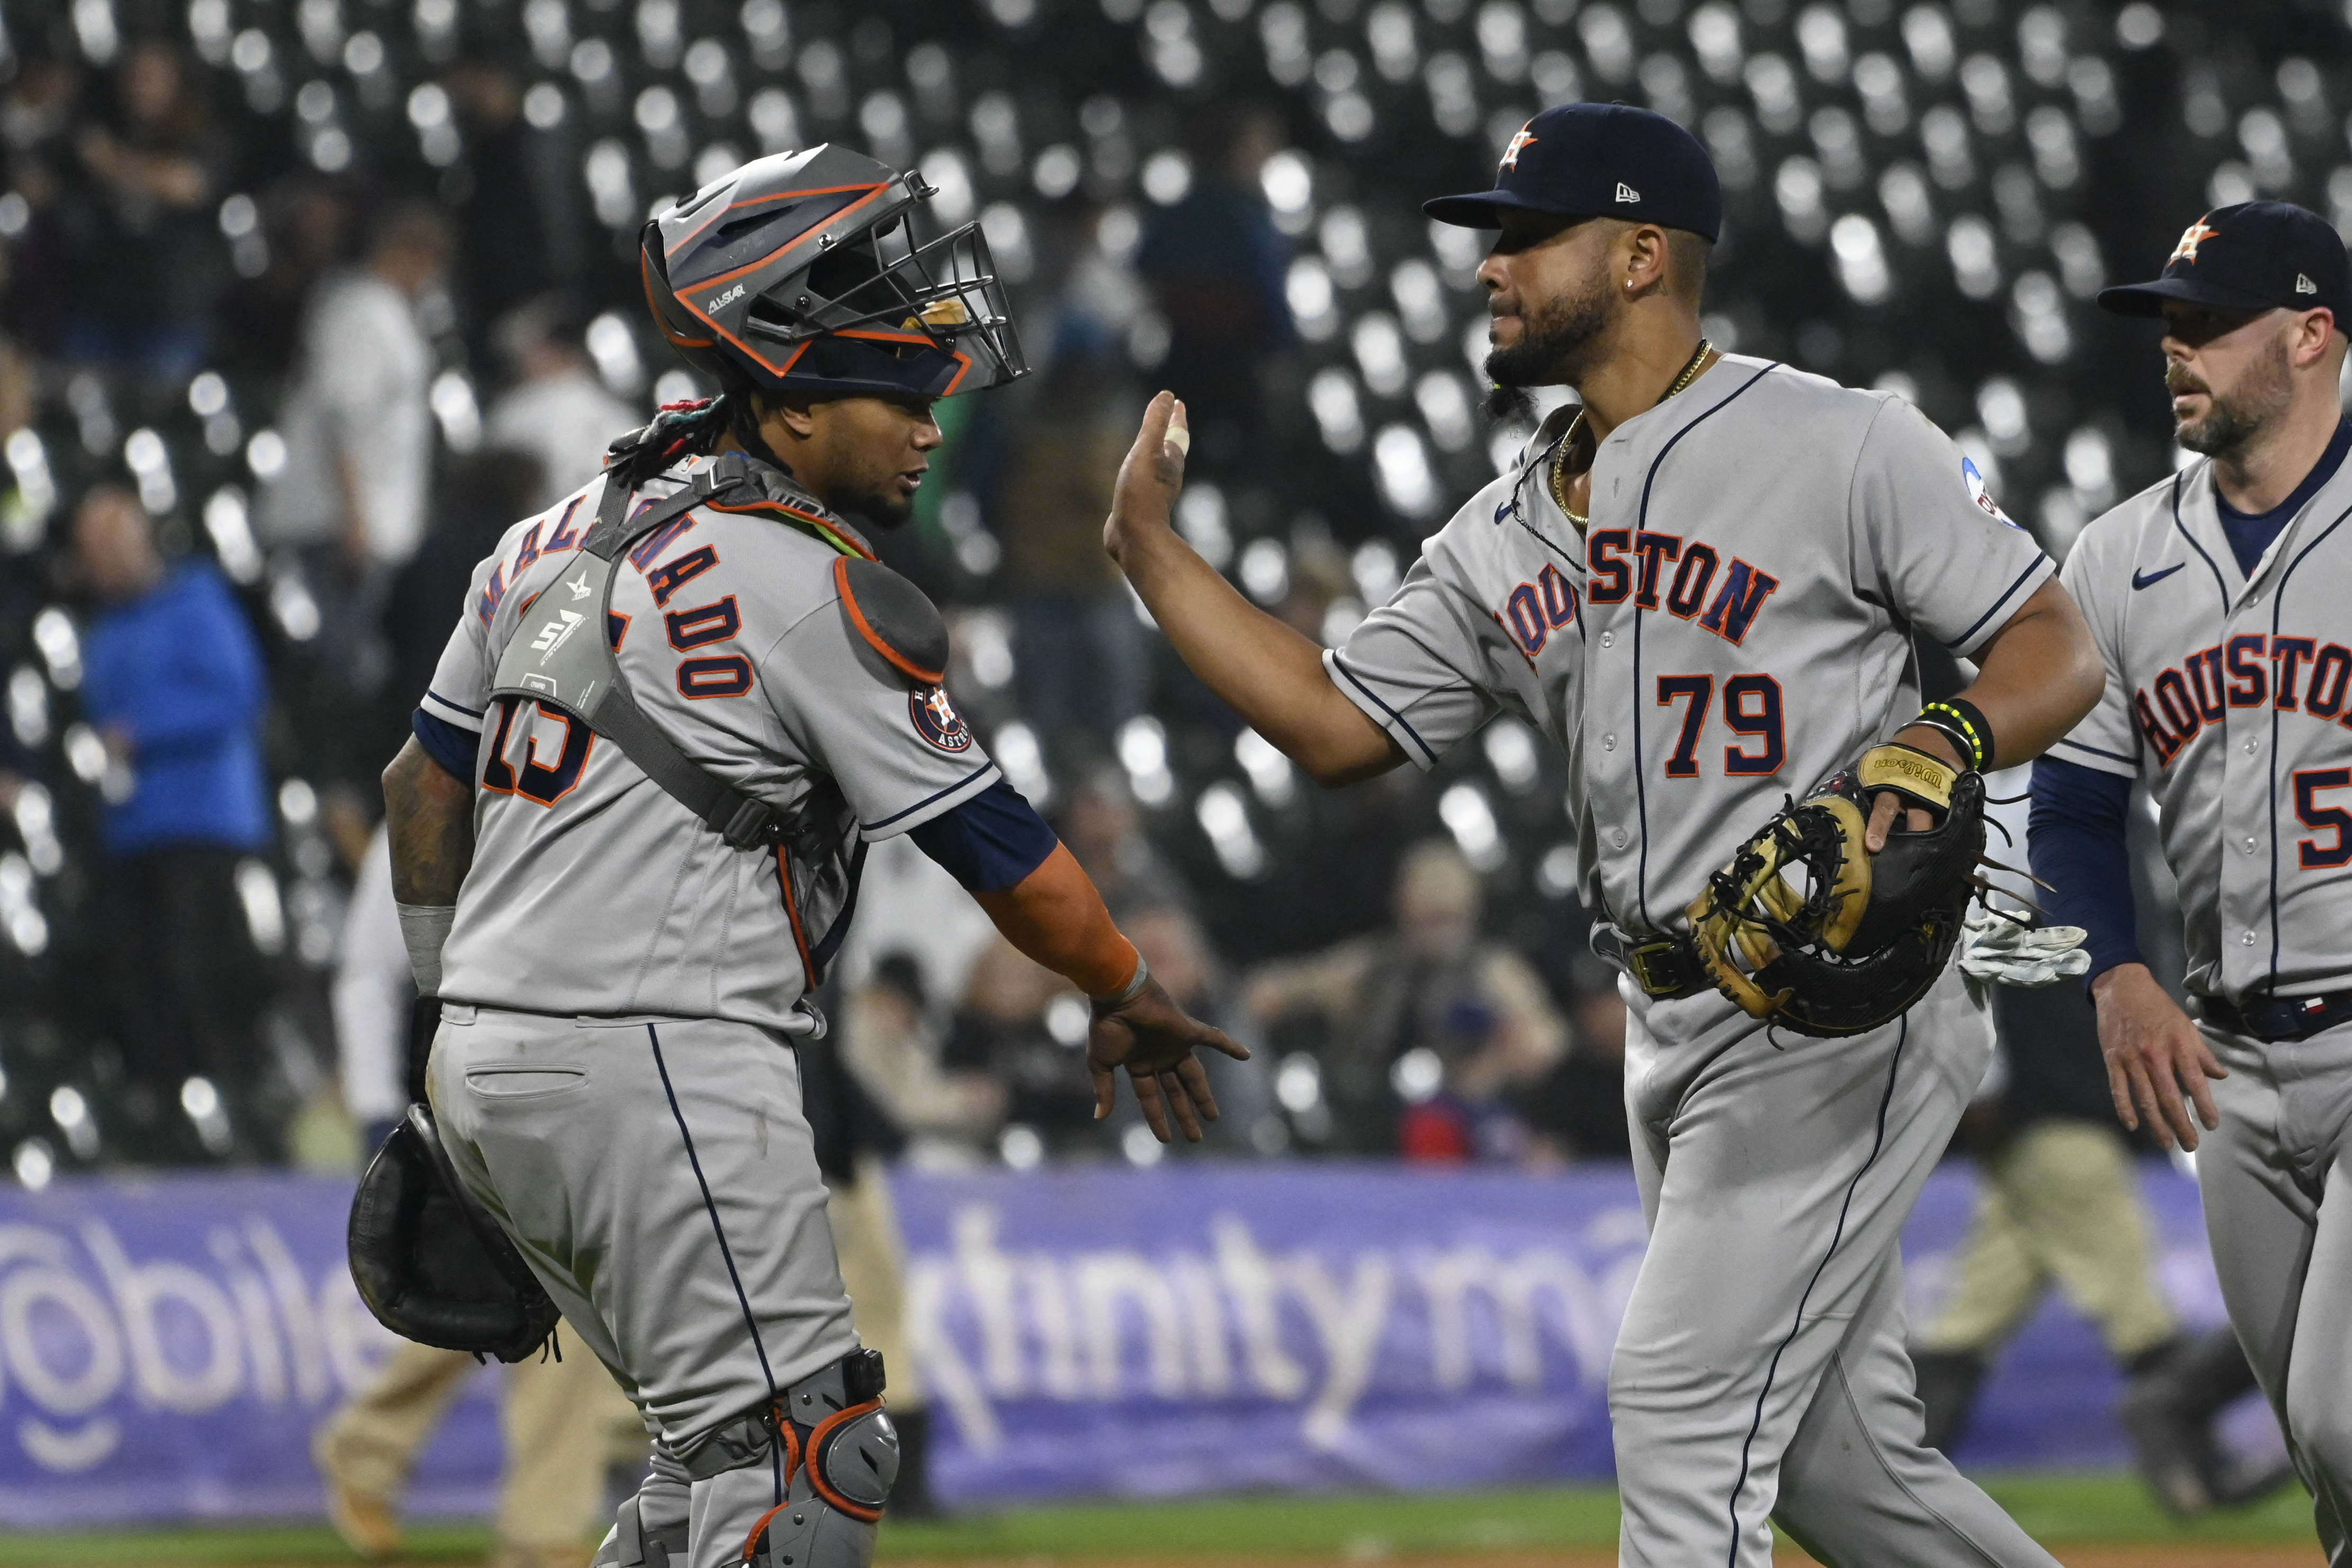 Chicago White Sox defeat the Astros, 1-0, to earn their first